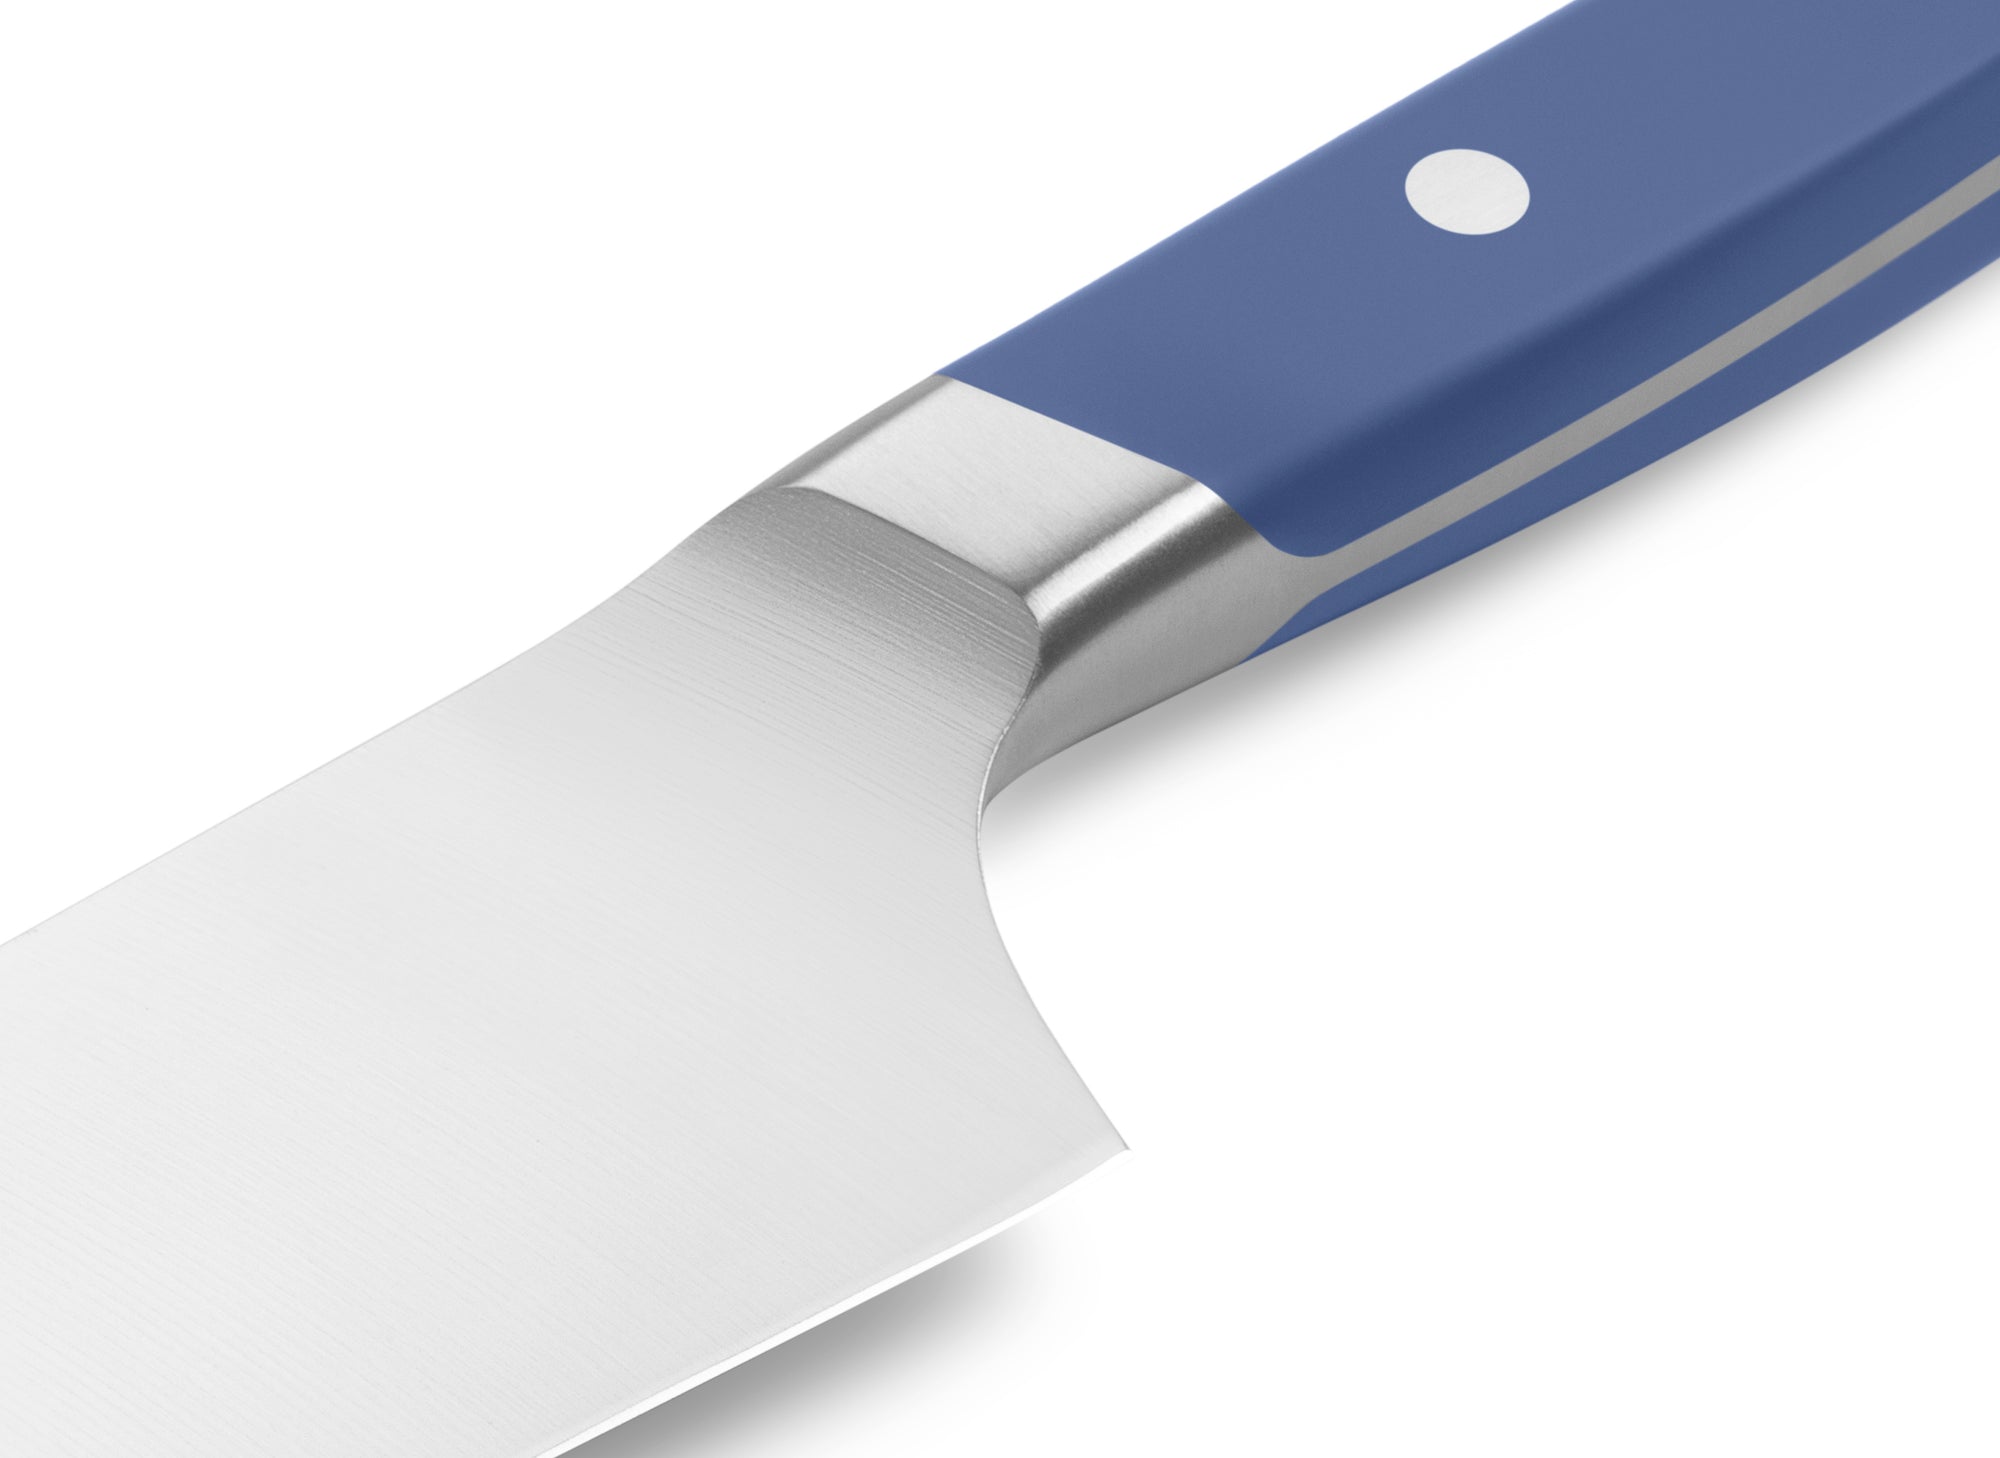 The Misen Chef's Knife in blue features a unique sloped bolster.